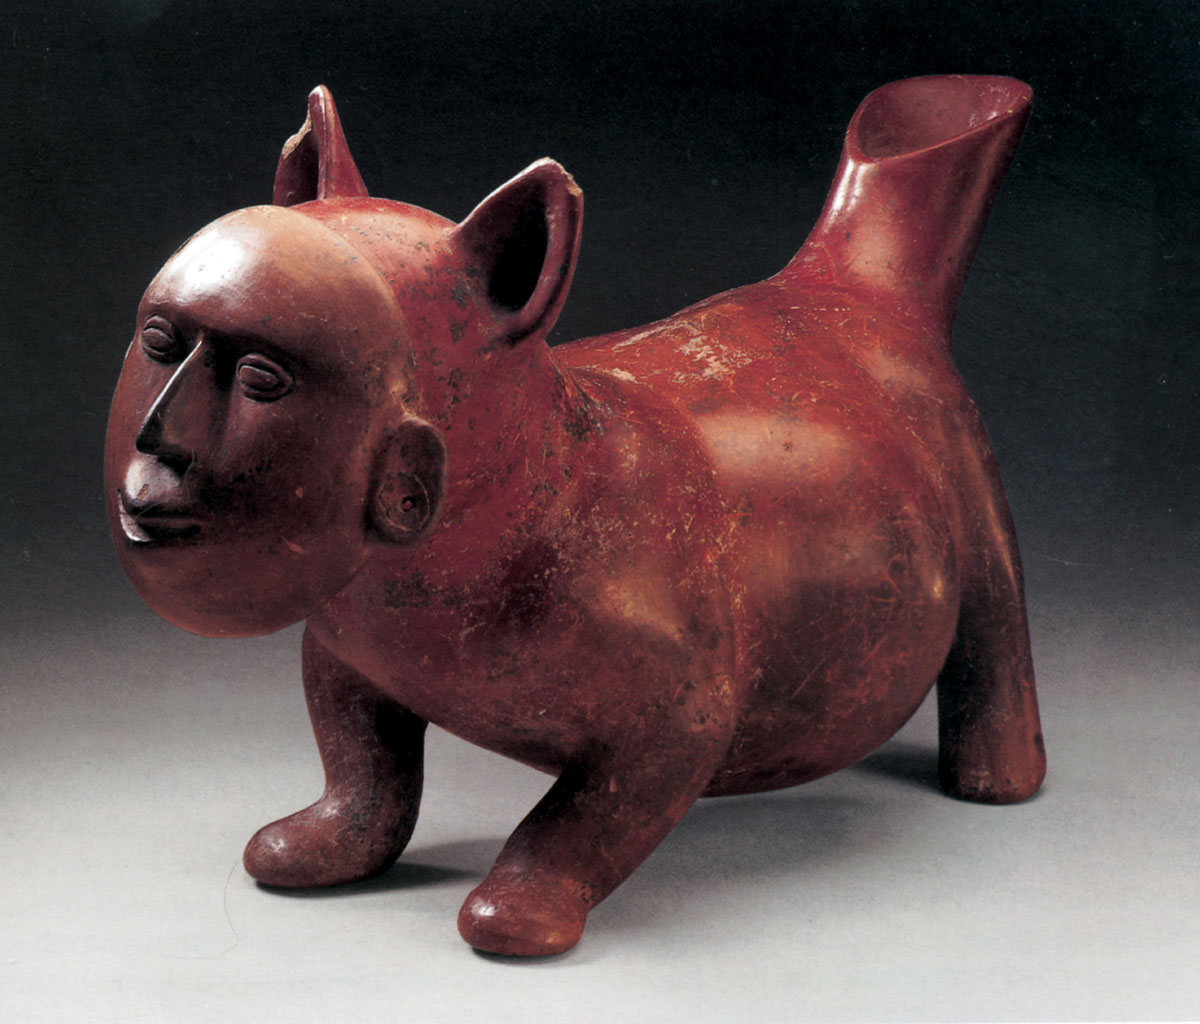 A photograph of a figurine of an escuincle wearing a mask with a human face. 